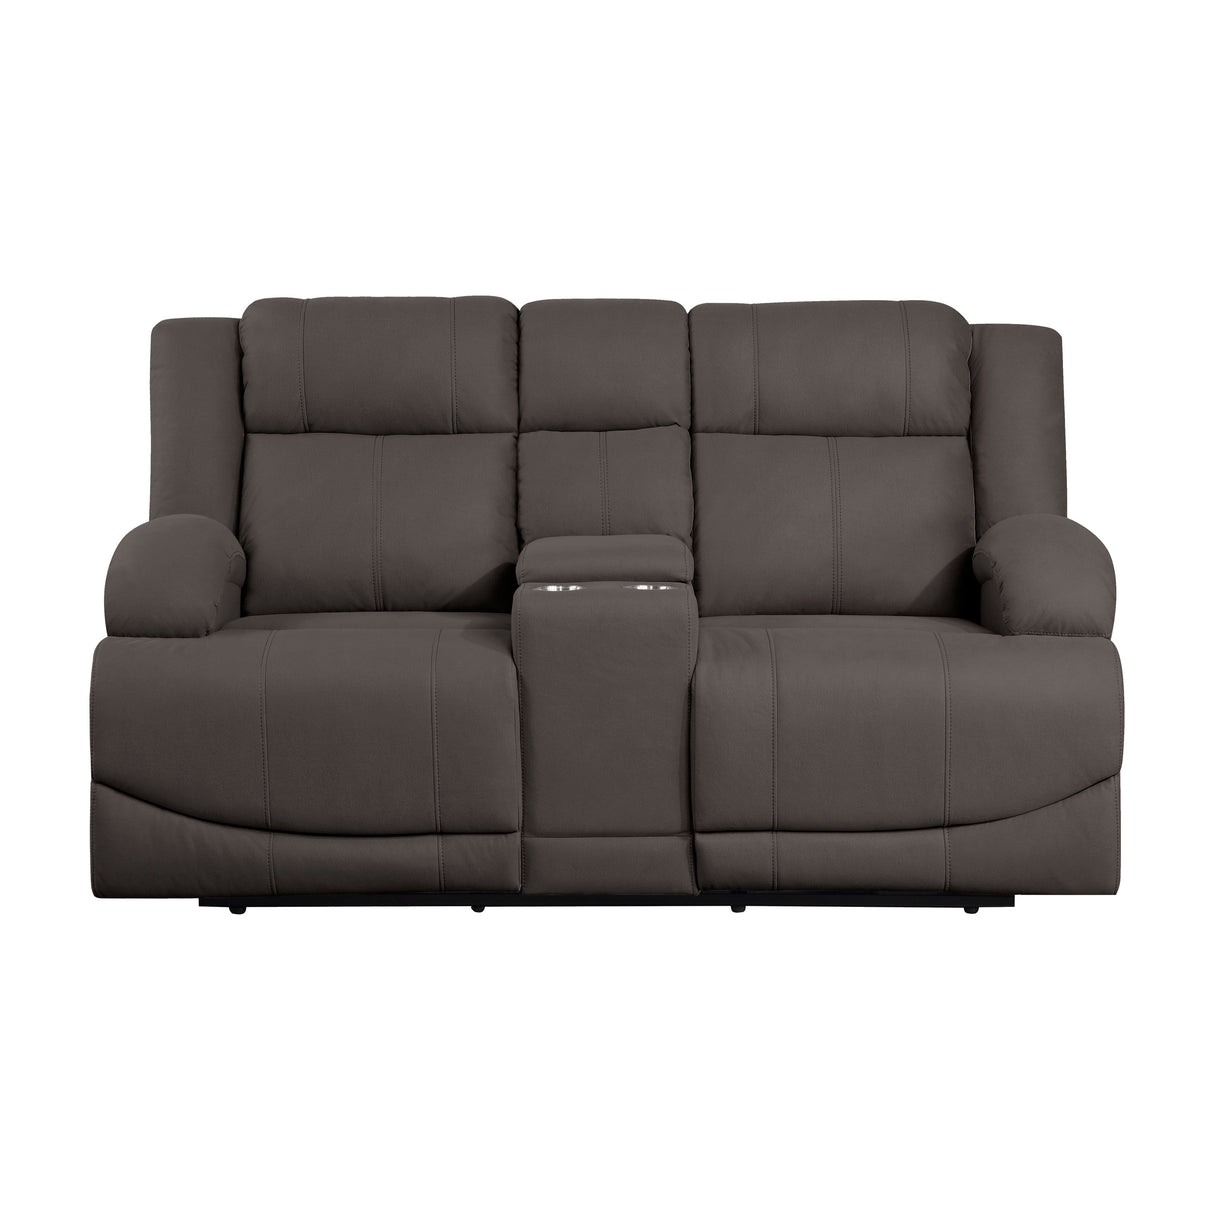 Camryn Chocolate Power Double Reclining Loveseat